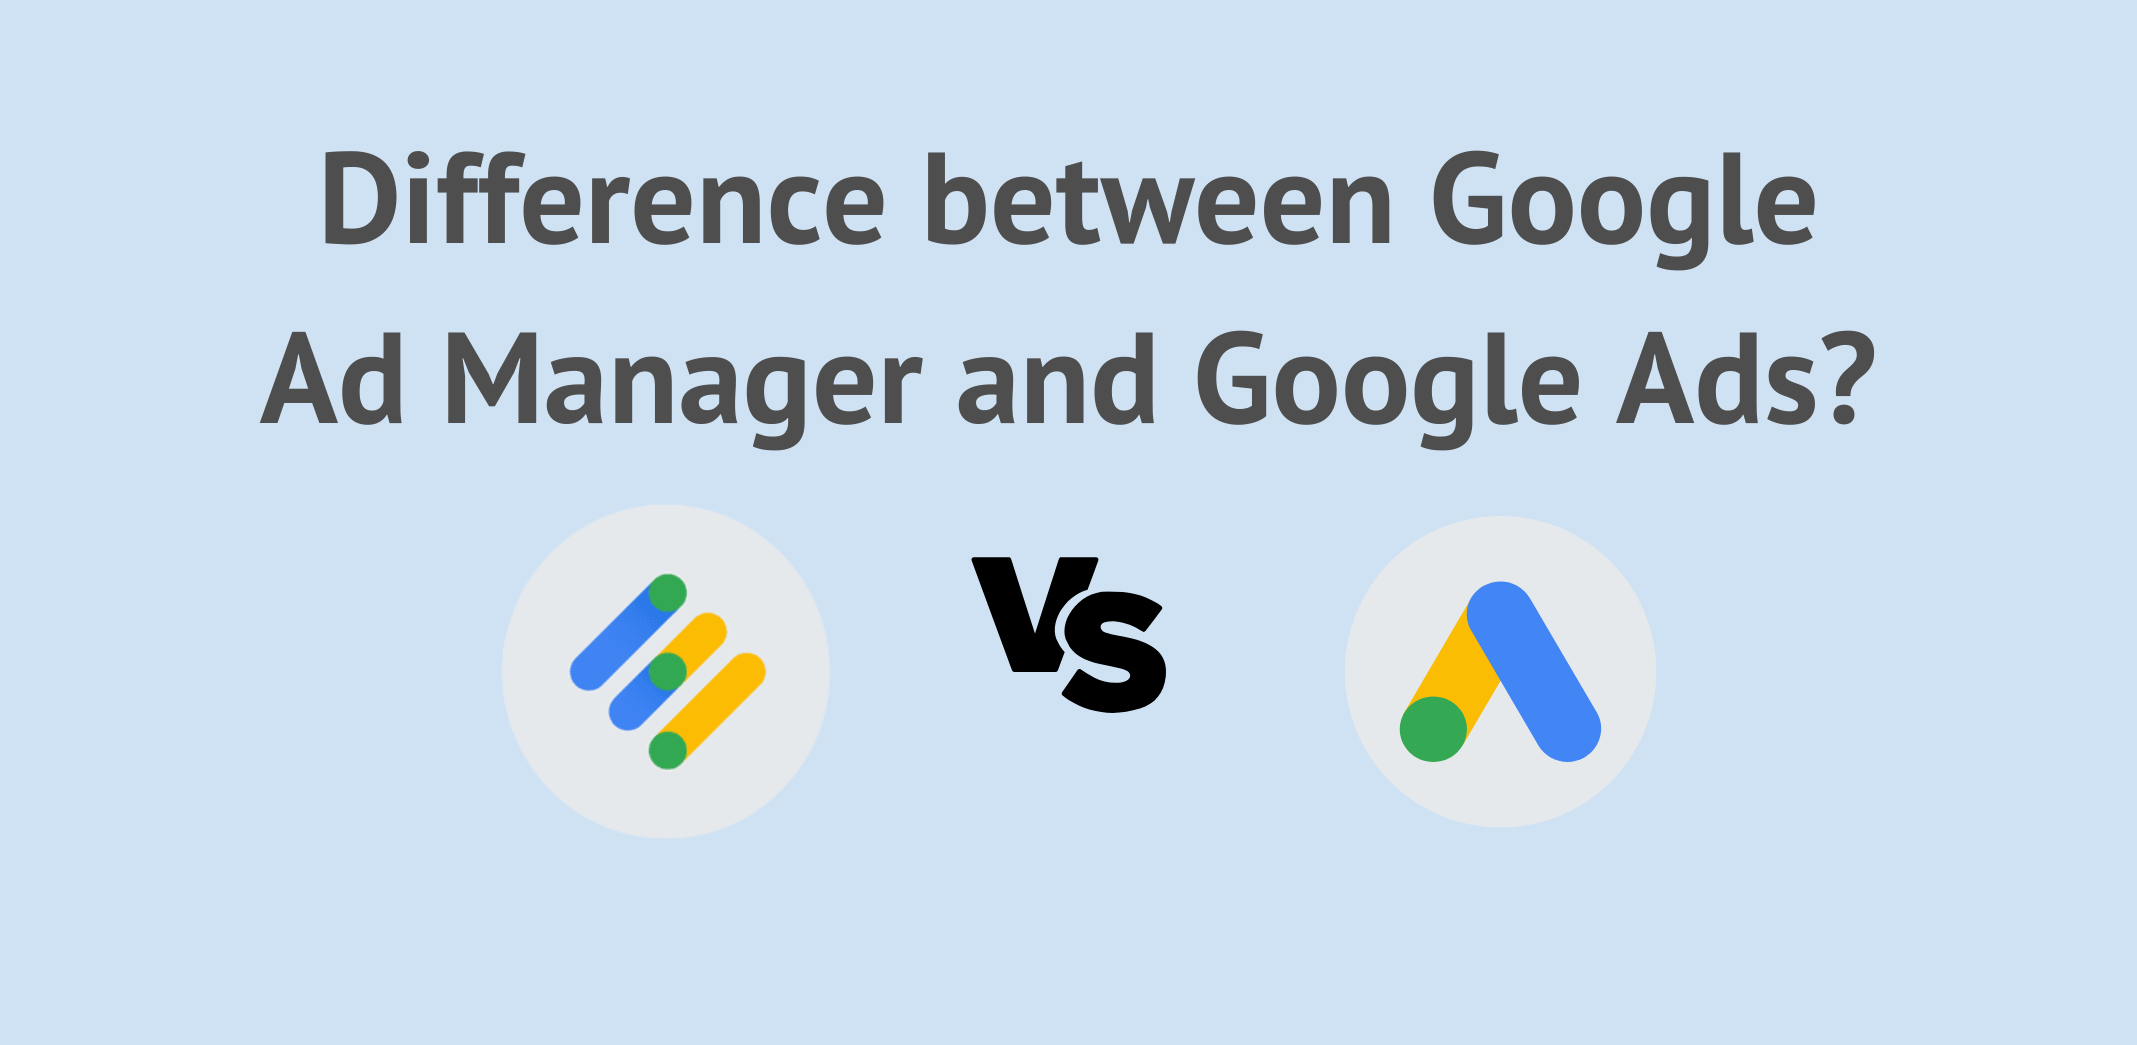 What is the difference between Google Ad Manager and Google Ads?